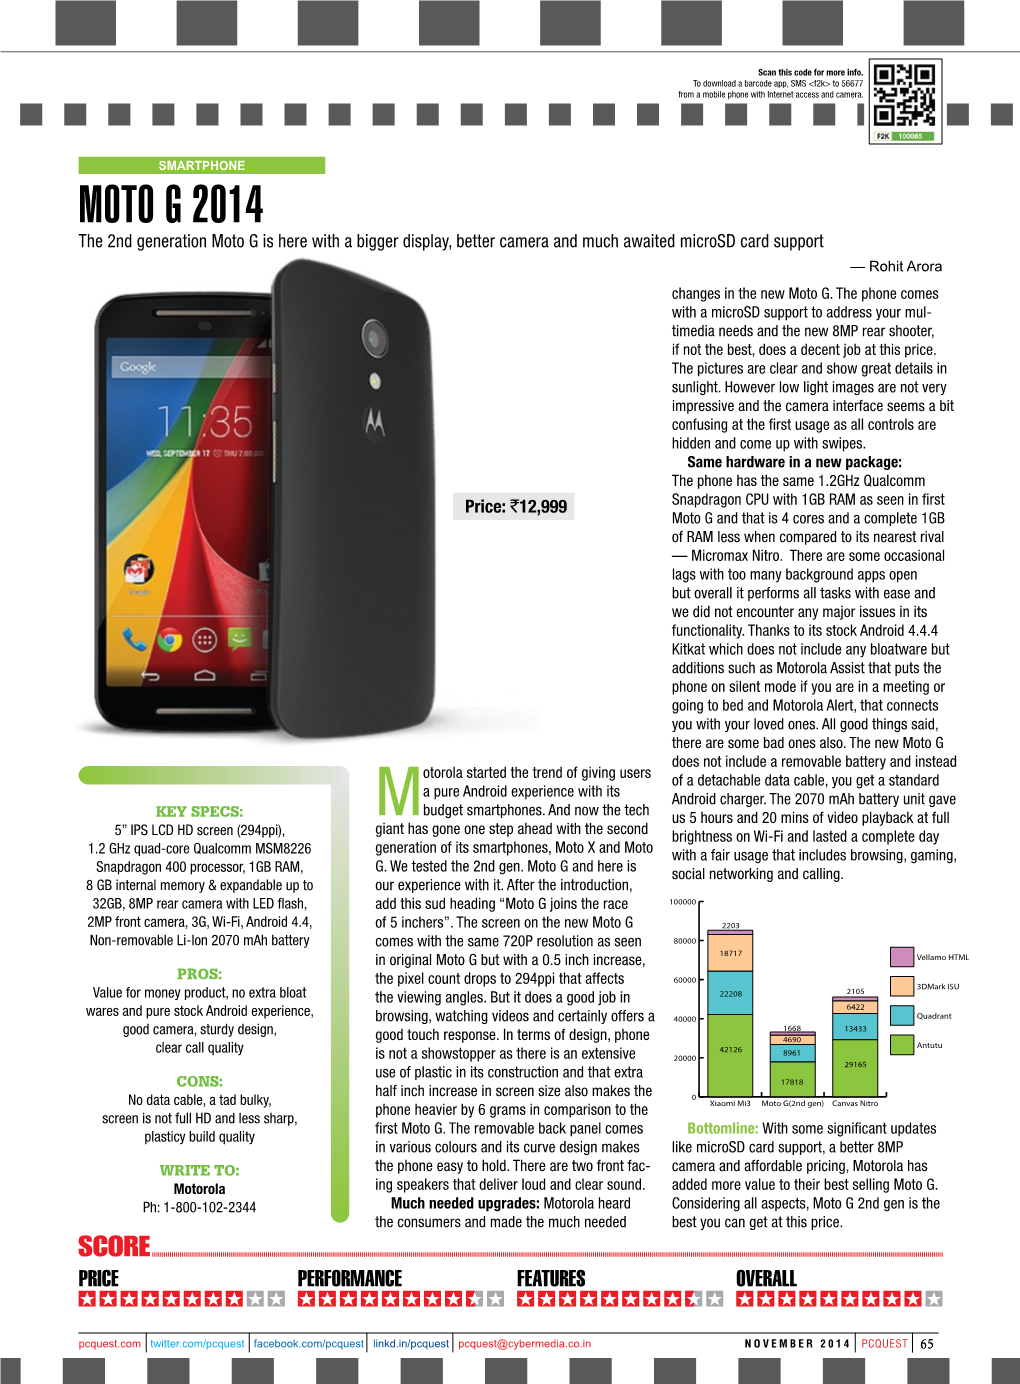 Moto G 2Nd Gen Is the the Consumers and Made the Much Needed Best You Can Get at This Price